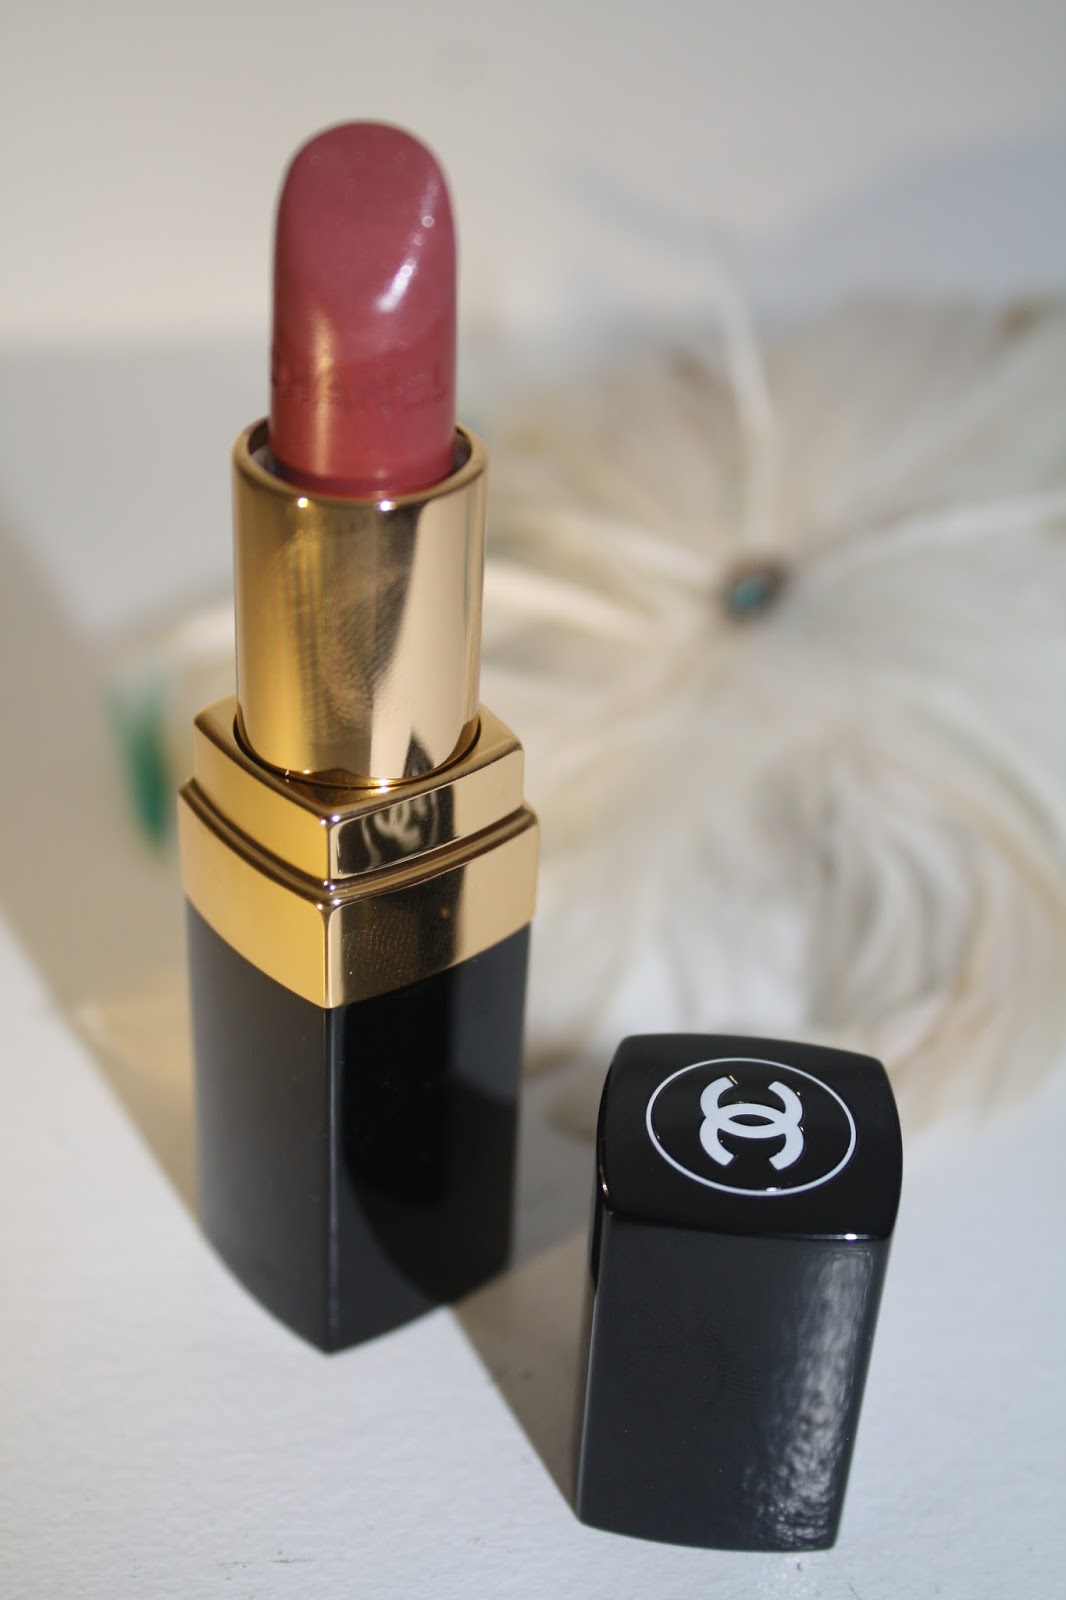 Chanel Mademoiselle (434) Rouge Coco Lipstick (2015) Review & Swatches